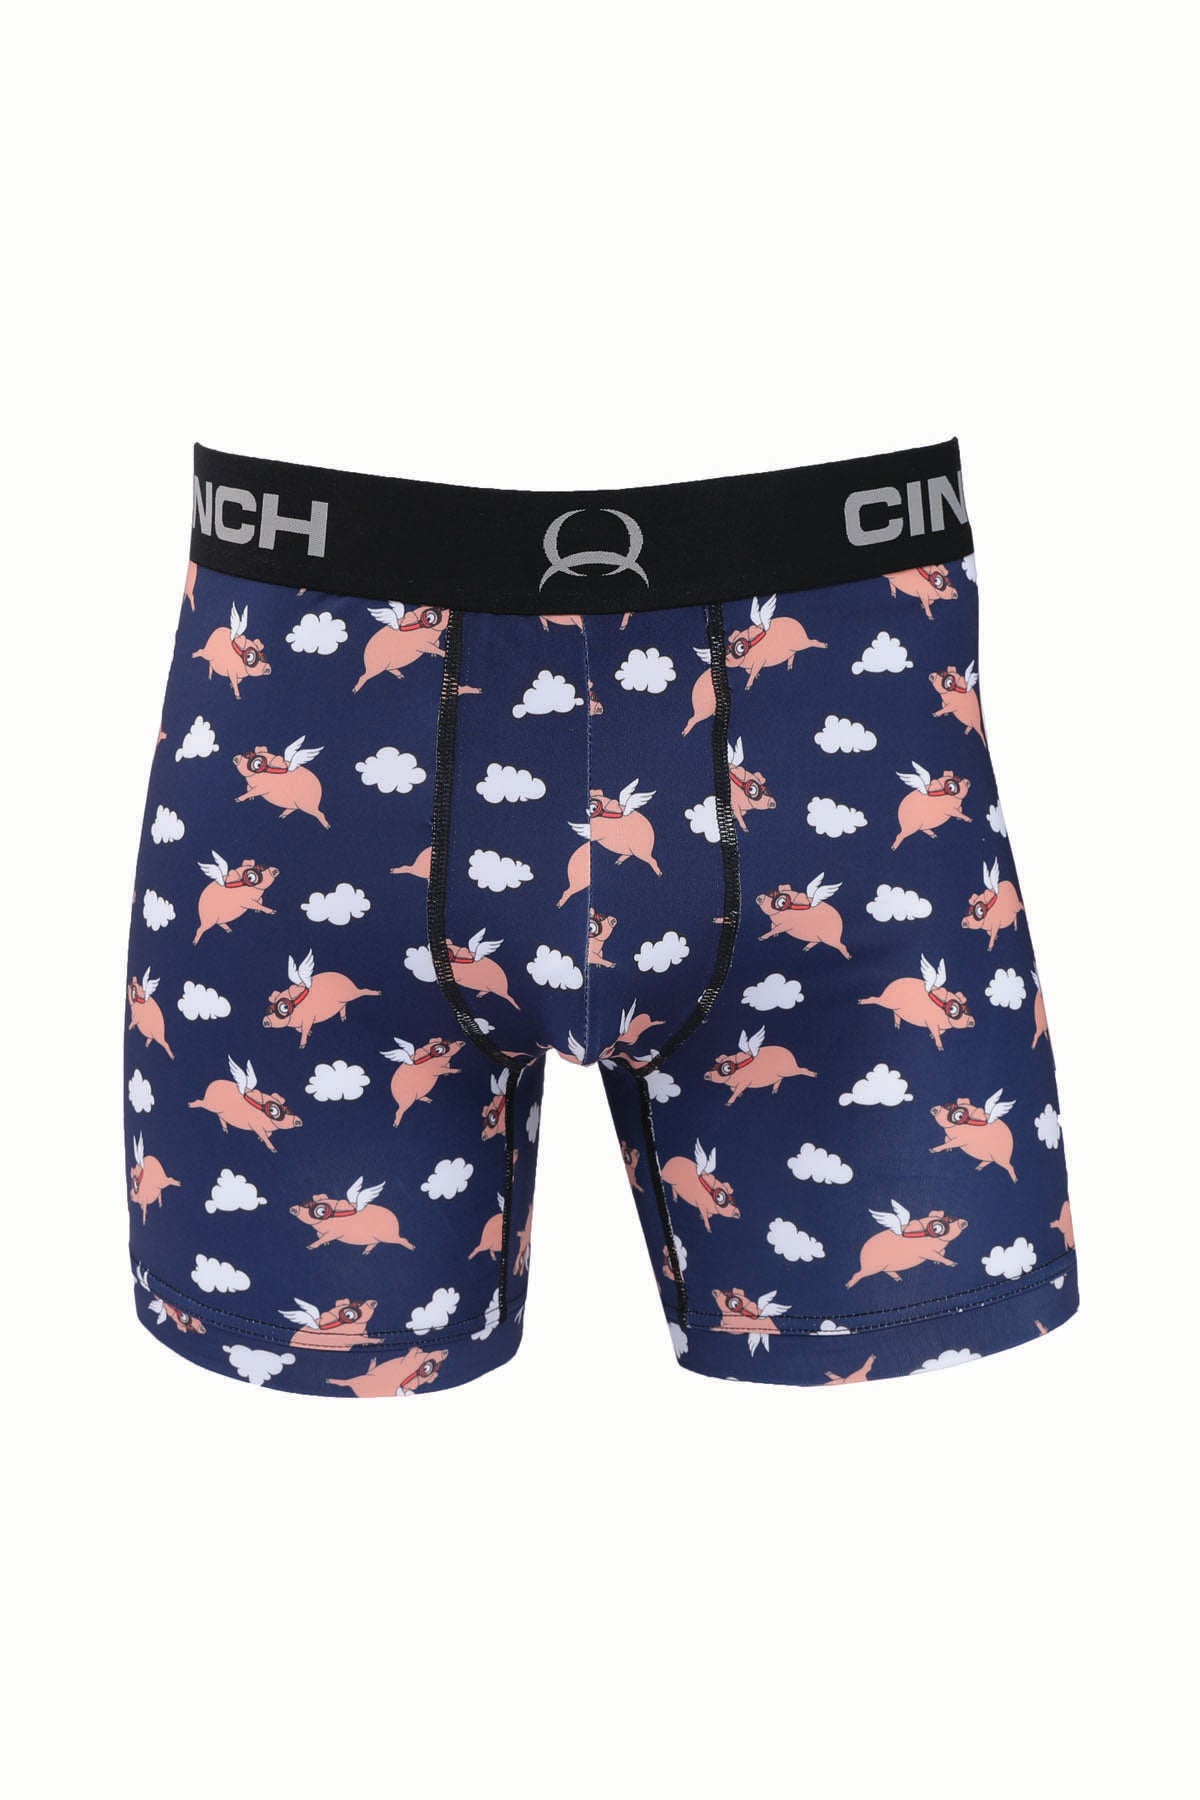 Cinch Mens 6" WHEN PIGS FLY Boxer Briefs